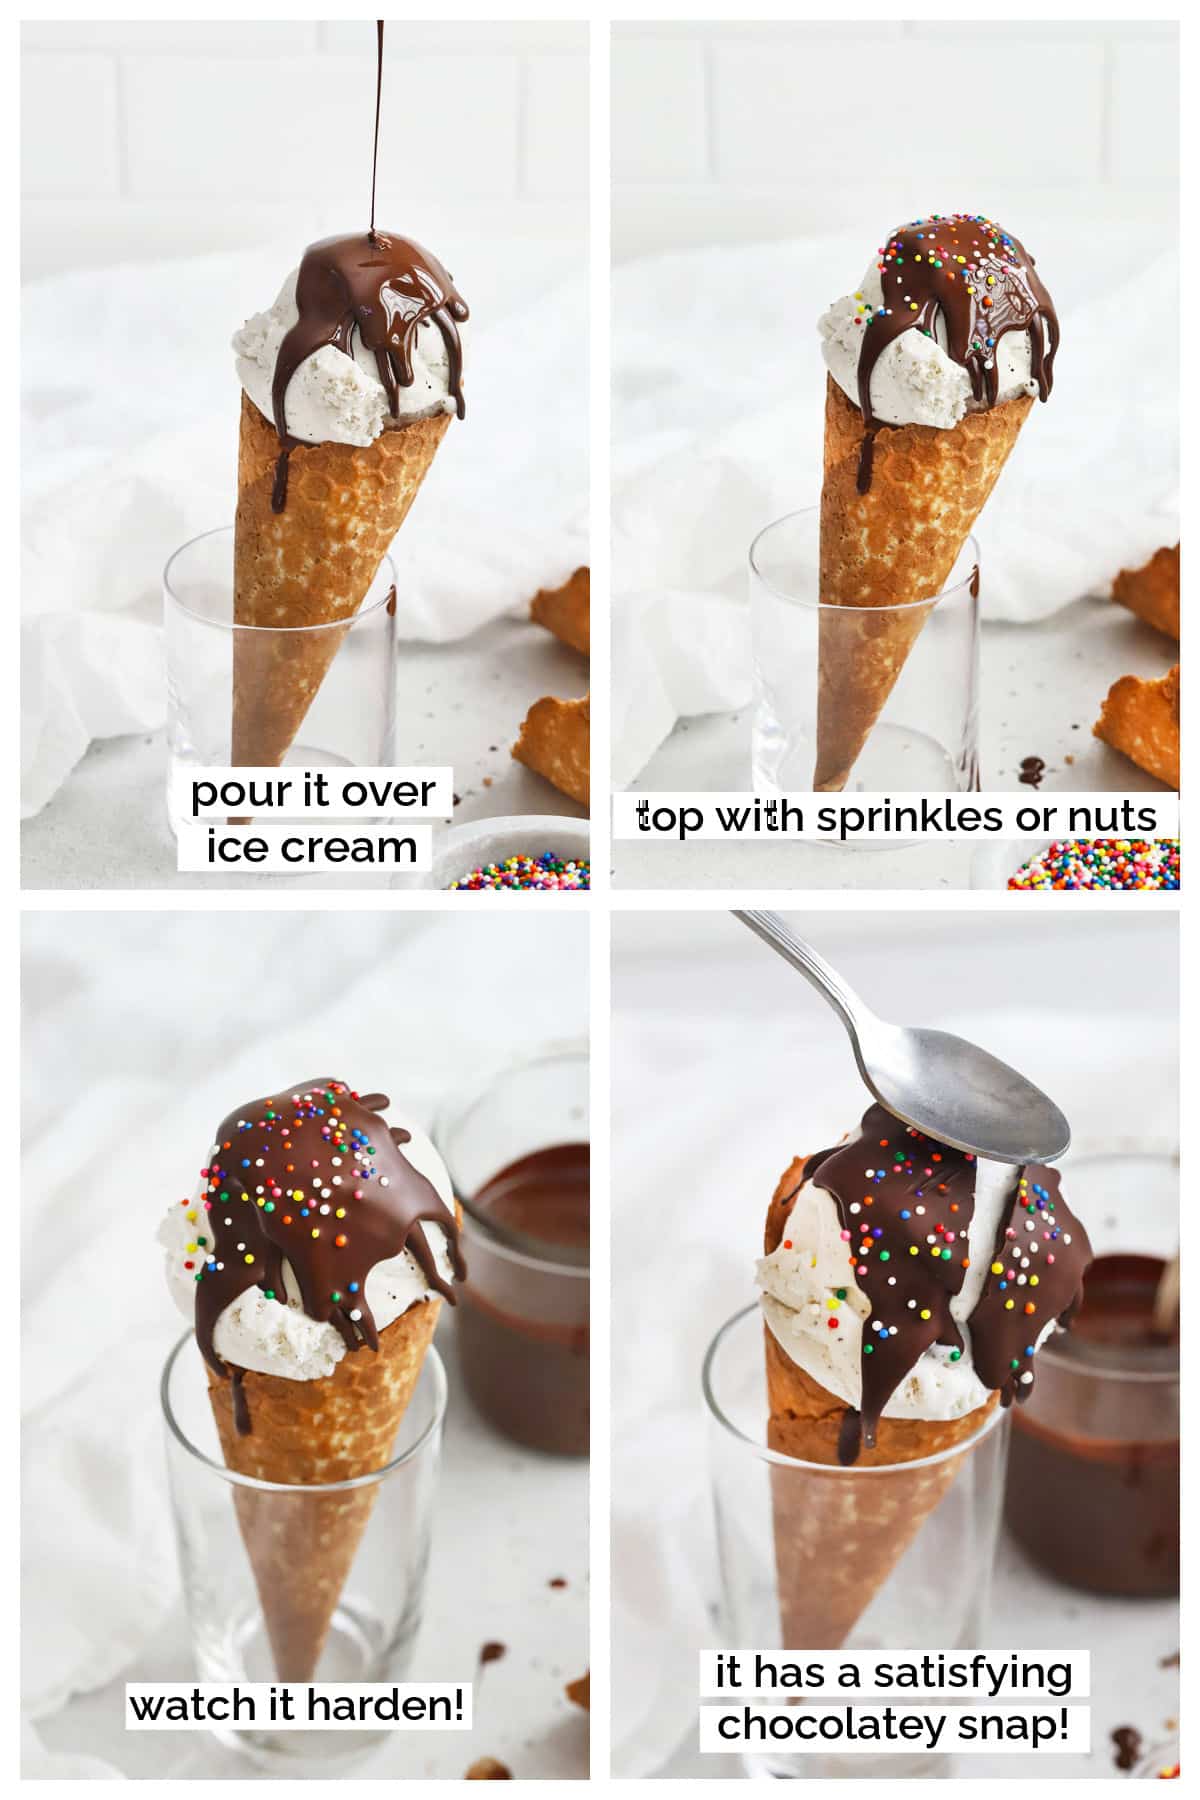 pouring homemade magic chocolate shell on an ice cream cone